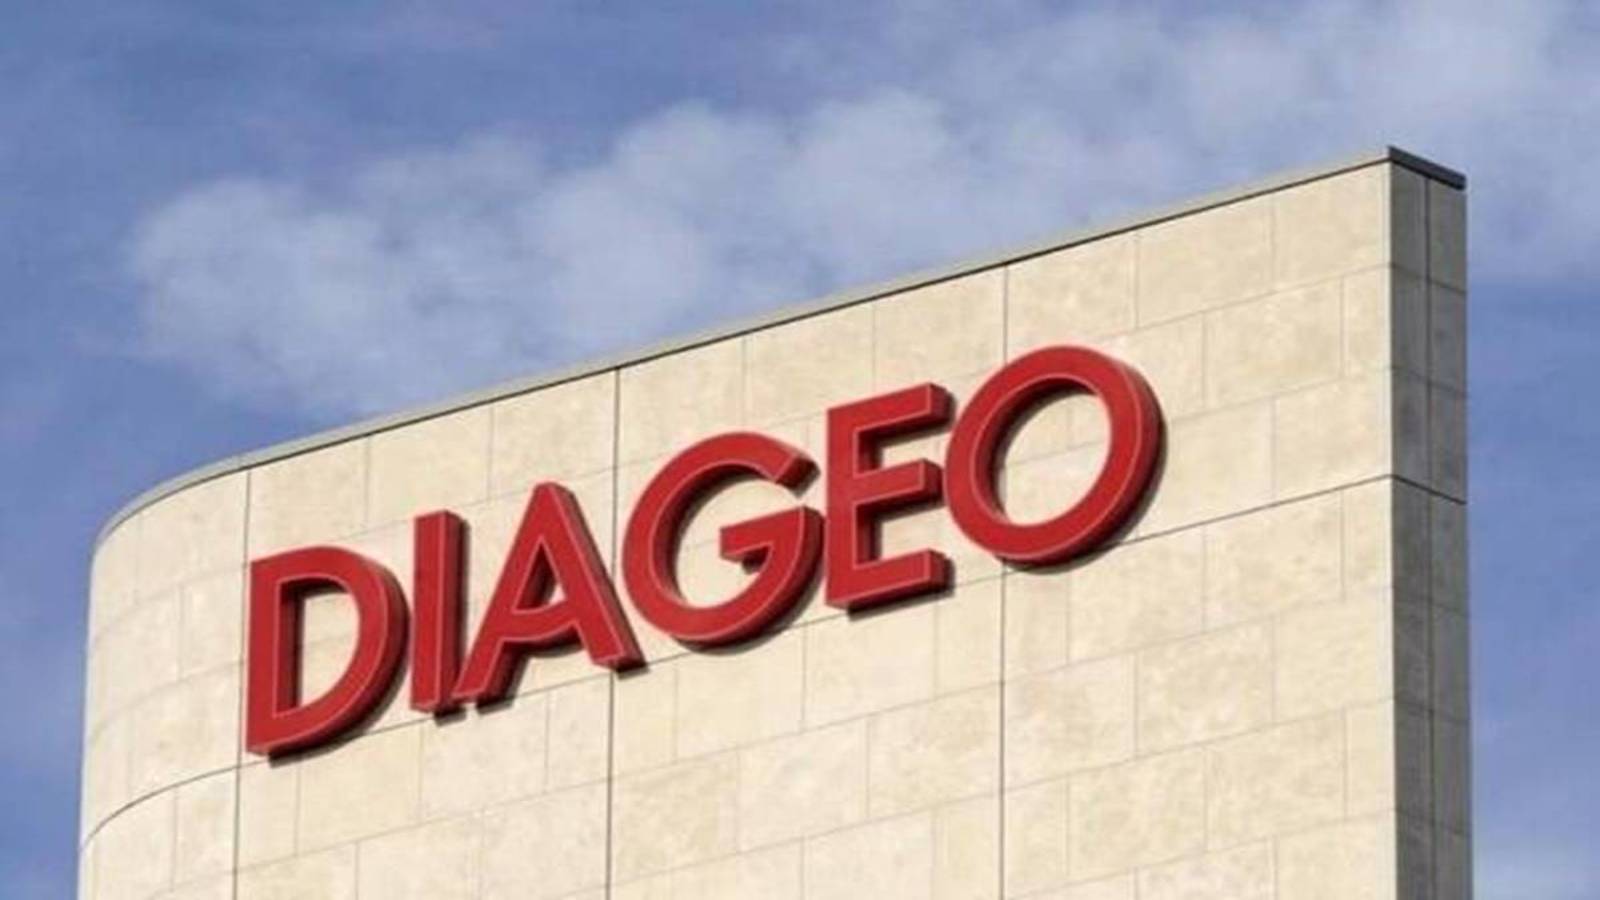 Diageo defies analysts’ forecasts with impressive 2022 full-year results driven by premium spirits